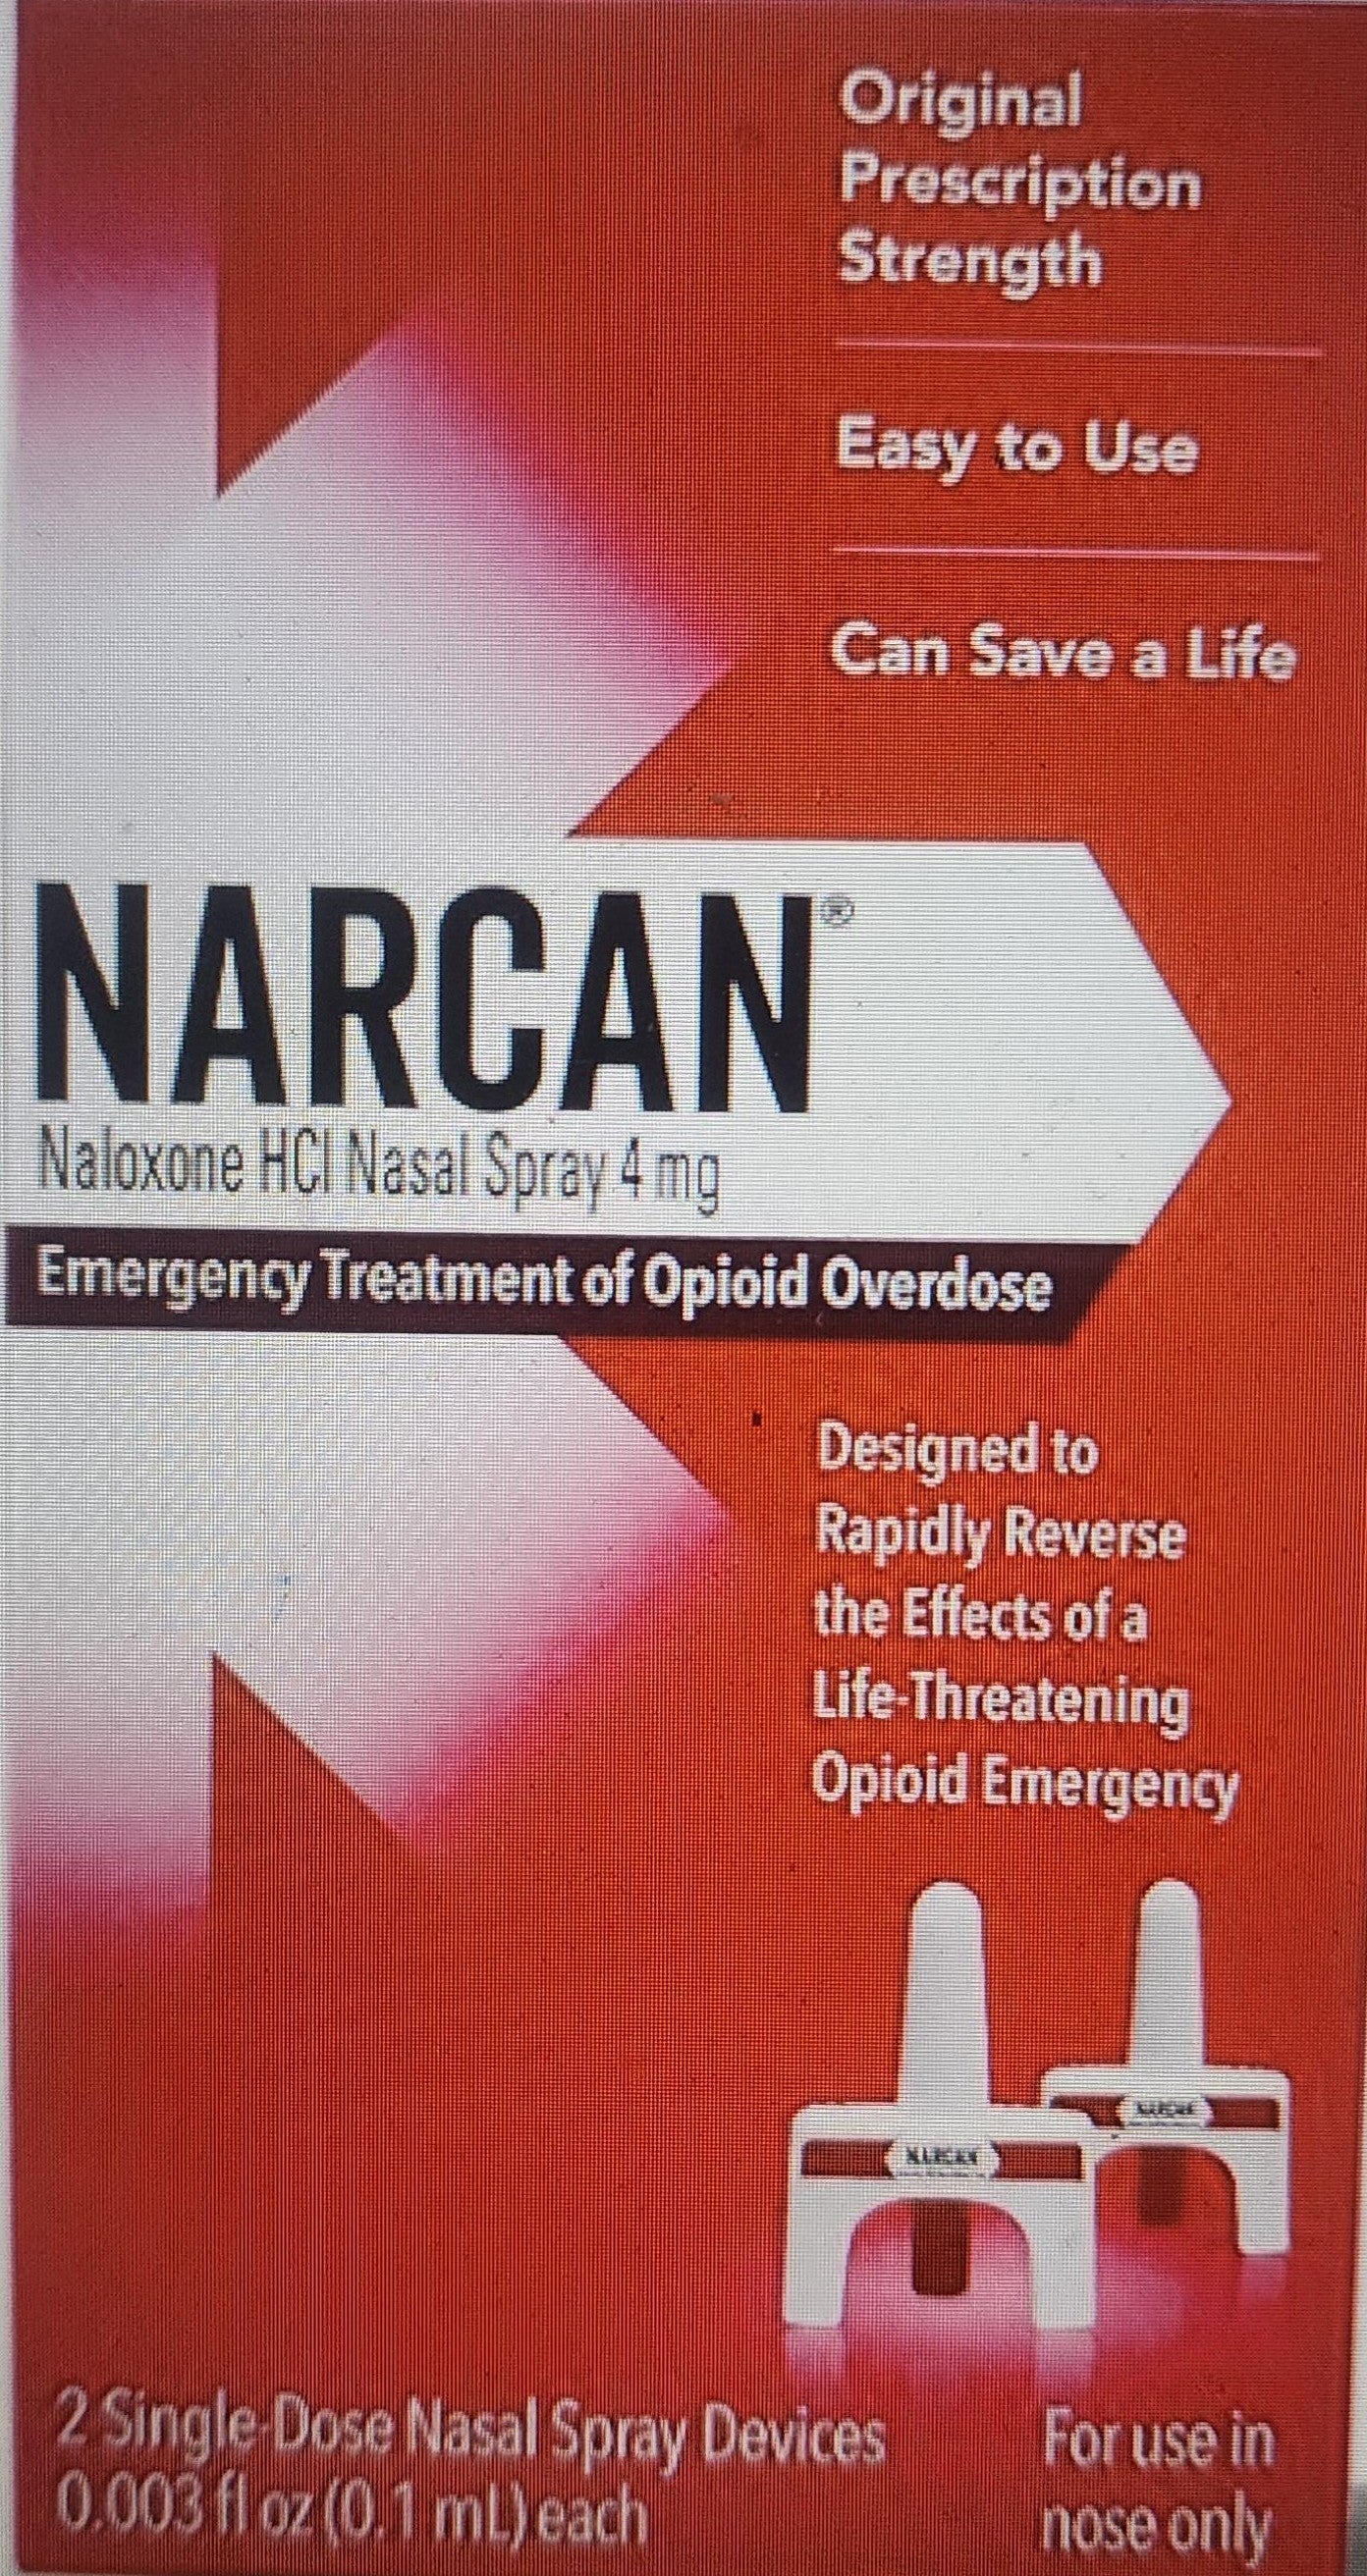 NARCAN Nasal Spray 4 mg, Emergency Treatment of Opioid Overdose, 2 Single-Dose Devices